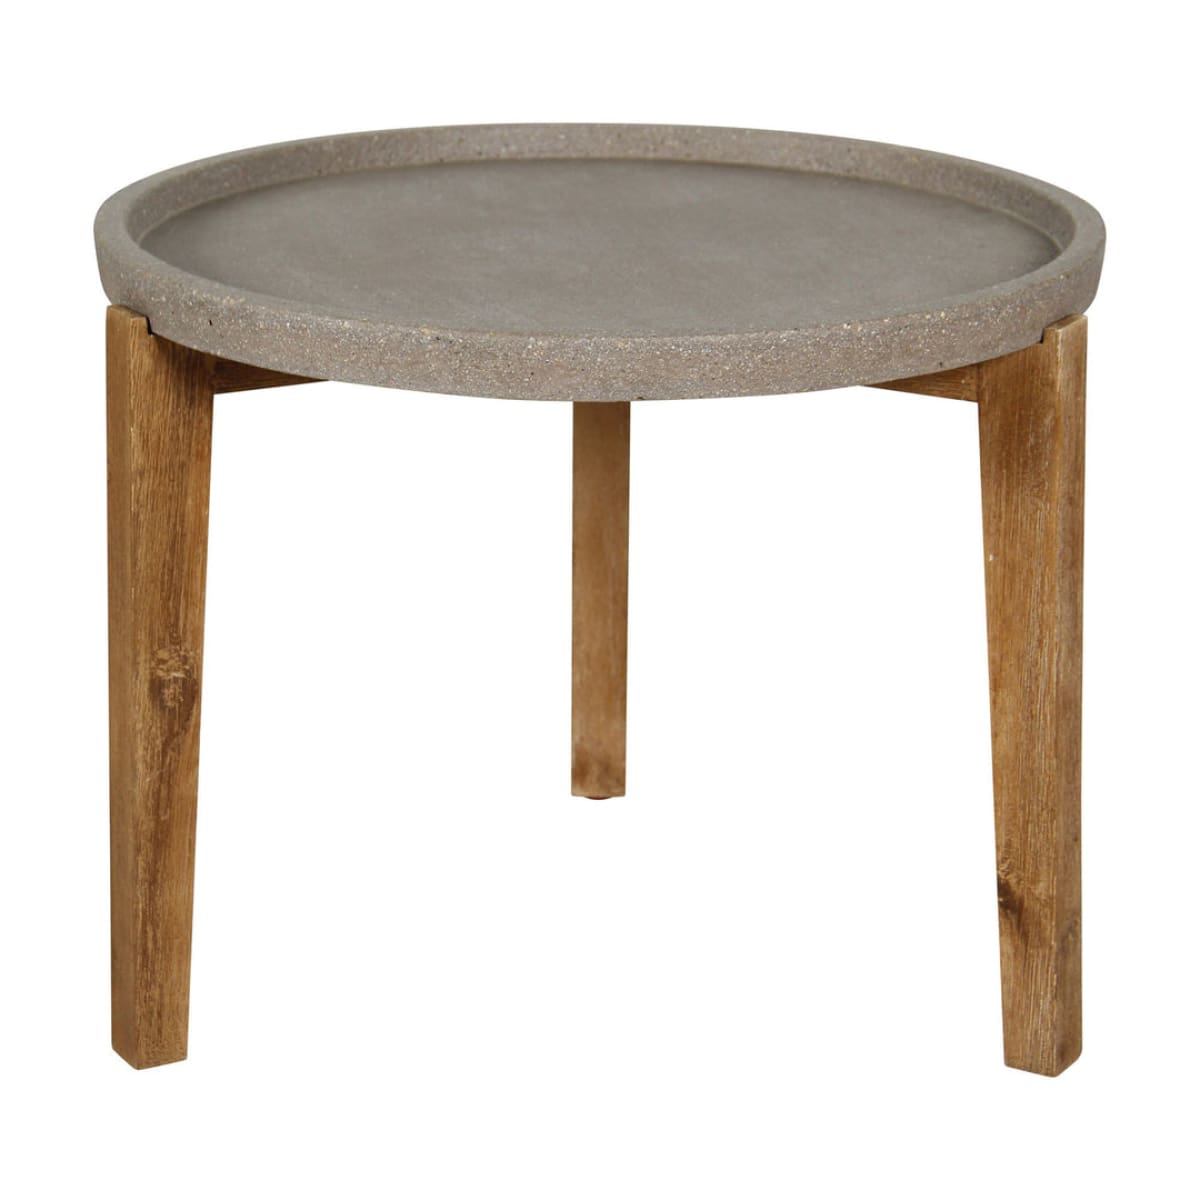 Patio Small Round Garden Table - Grey Stone - lh-import-side-tables